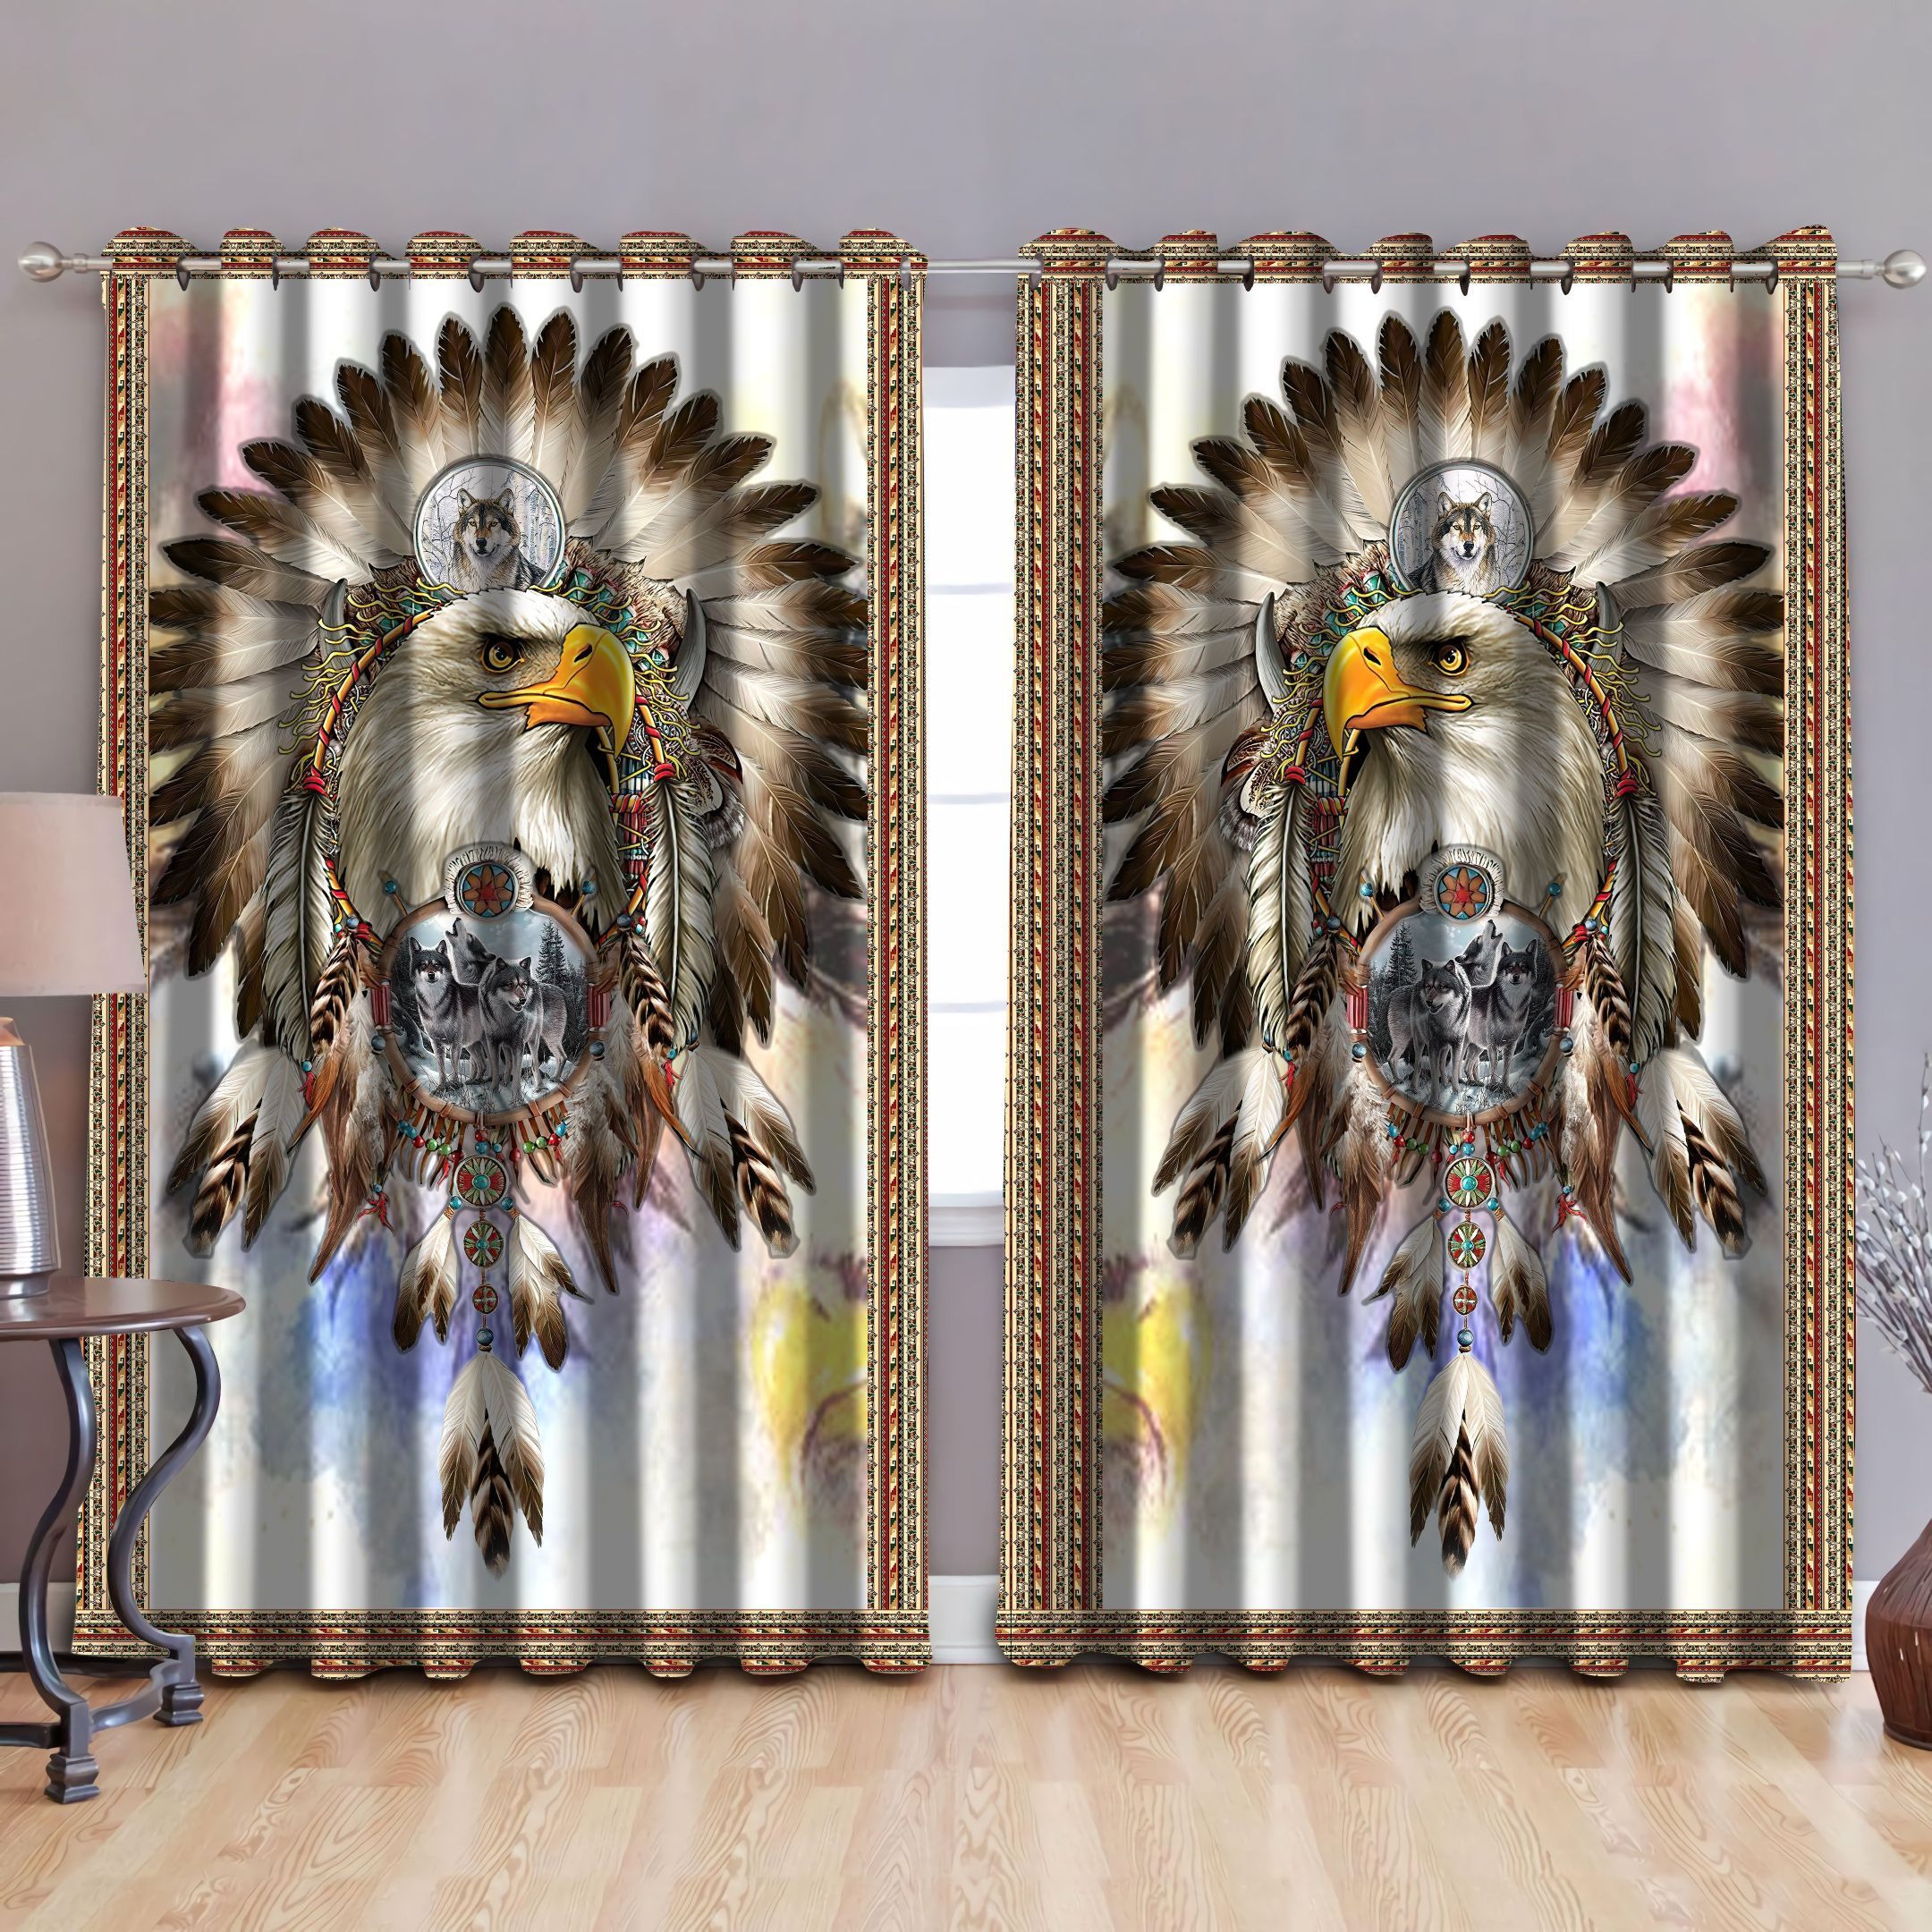 Beautiful Native American Eagle And Grey Wolves Dreamcatcher Printed Window Curtain